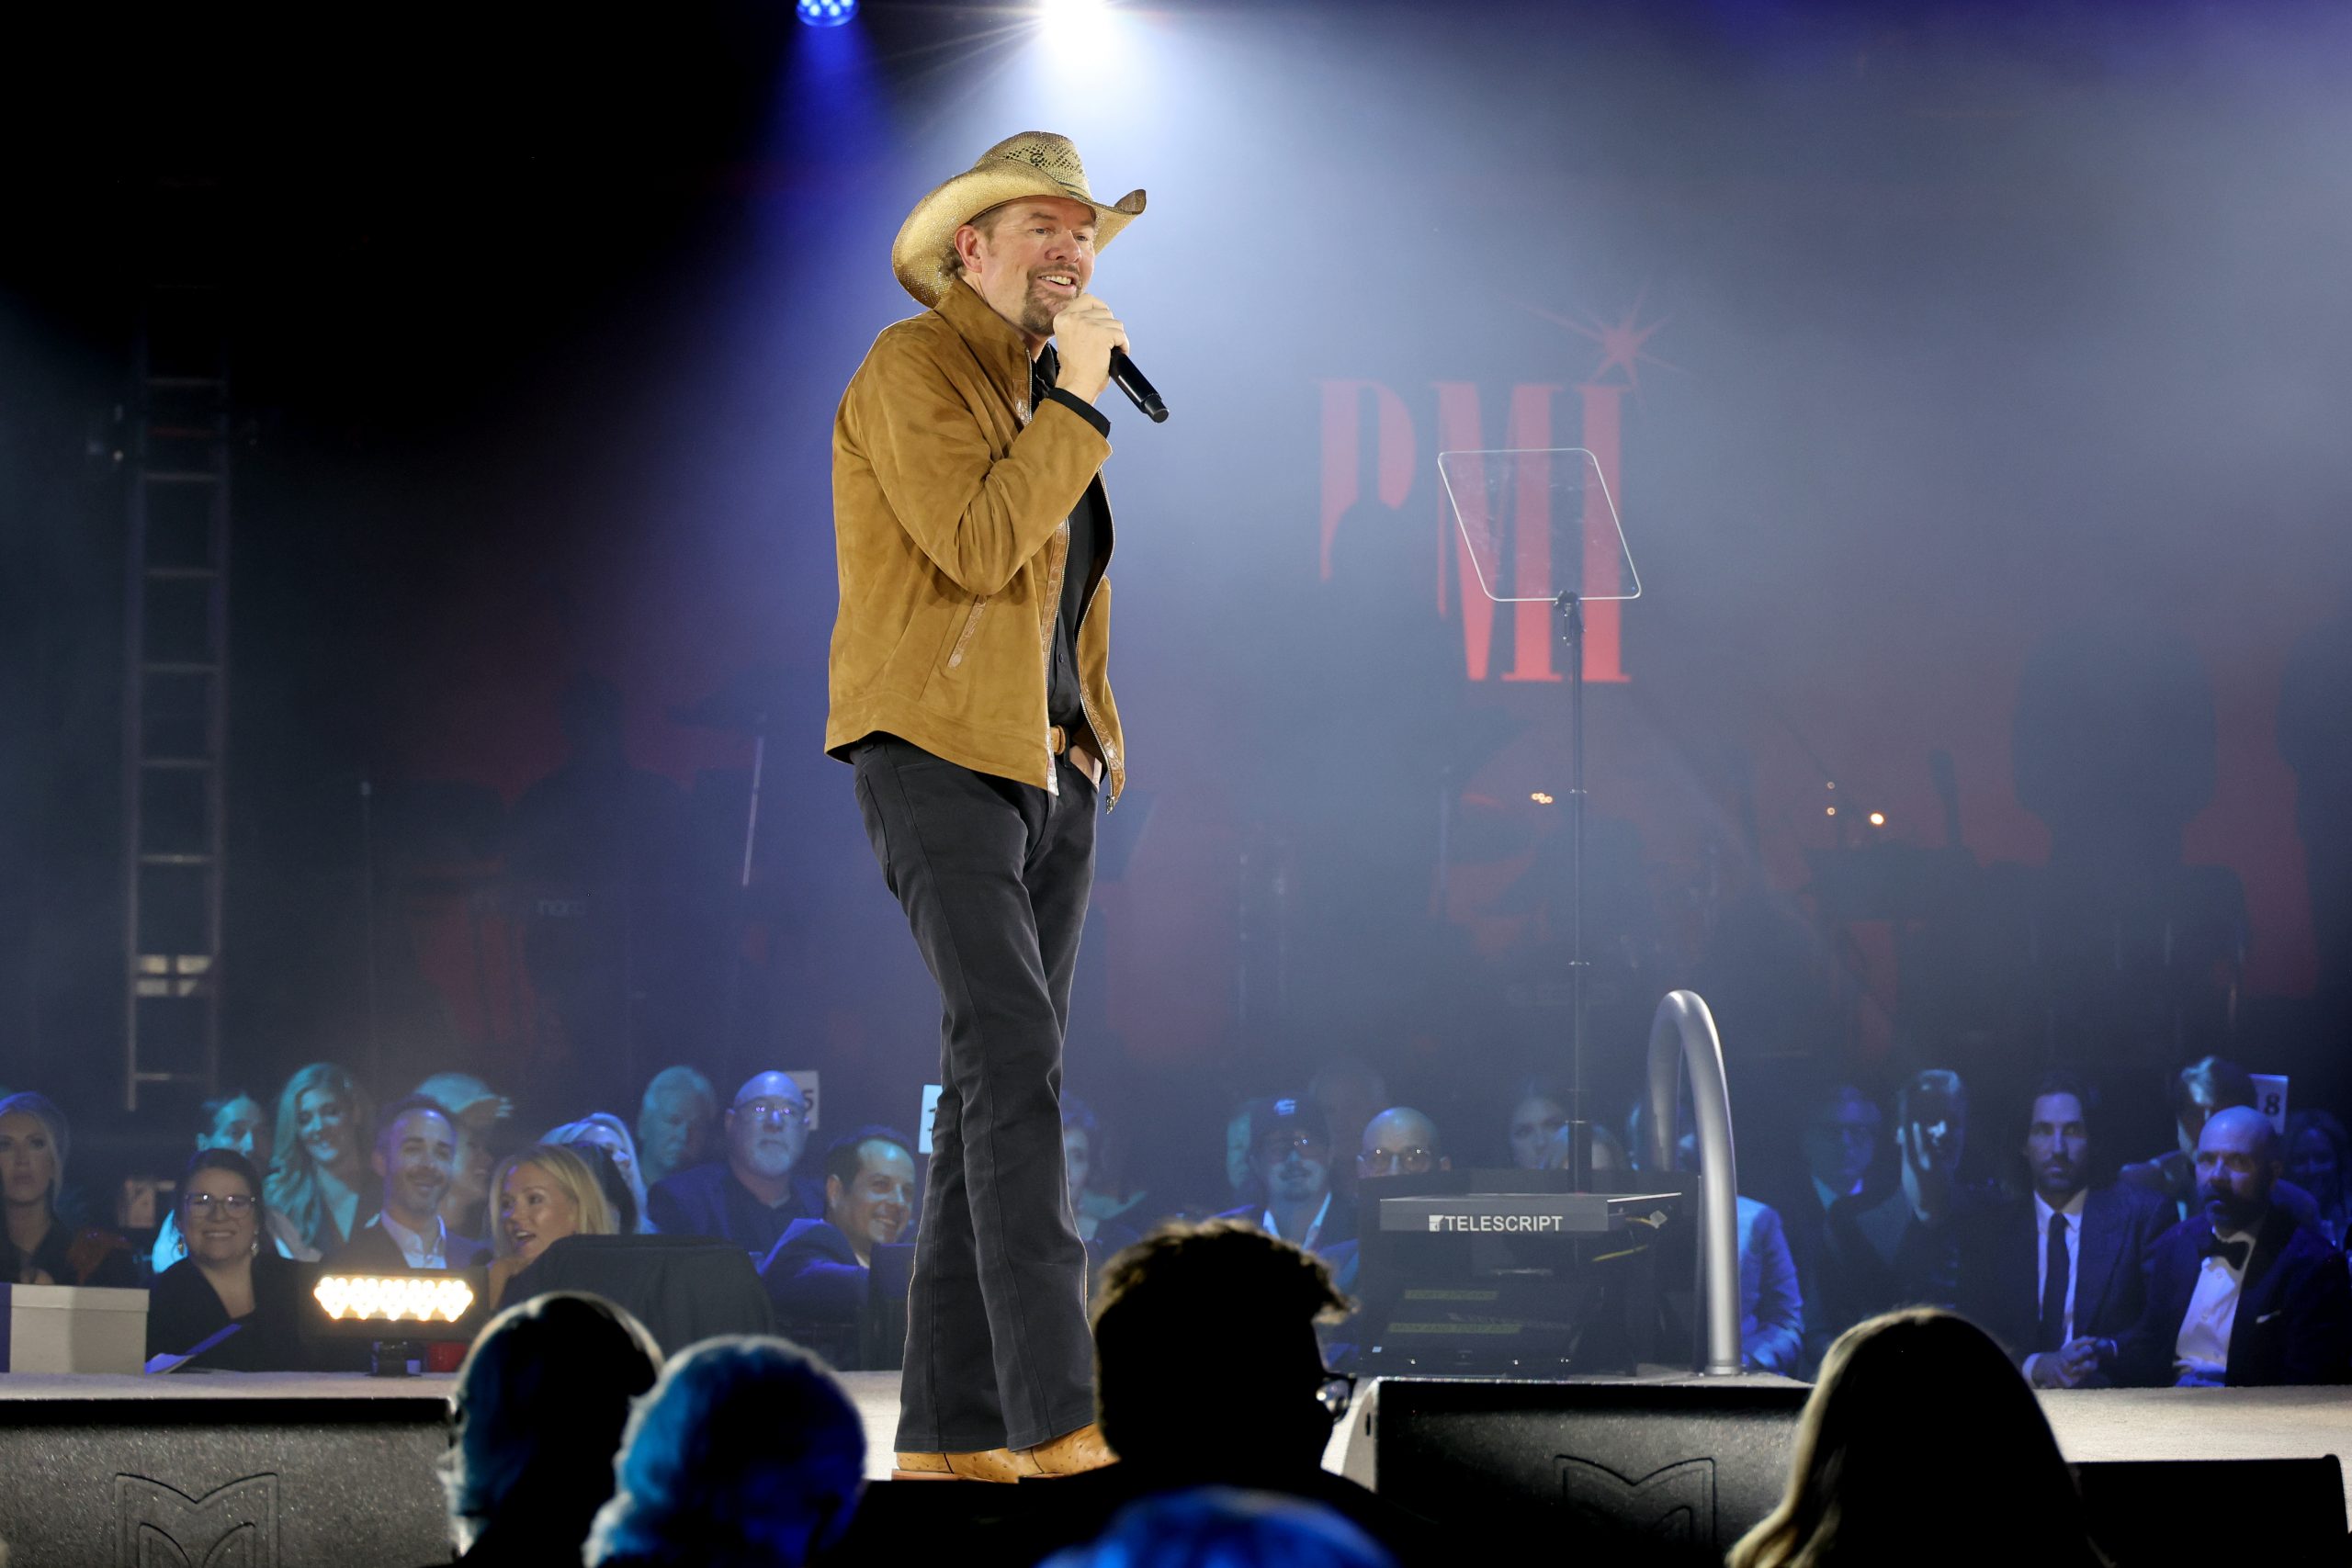 Toby Keith performs onstage at the 2022 BMI Country Awards on Nov. 8, 2022 in Nashville, Tennessee. (Photo by Jason Kempin/Getty Images for BMI)